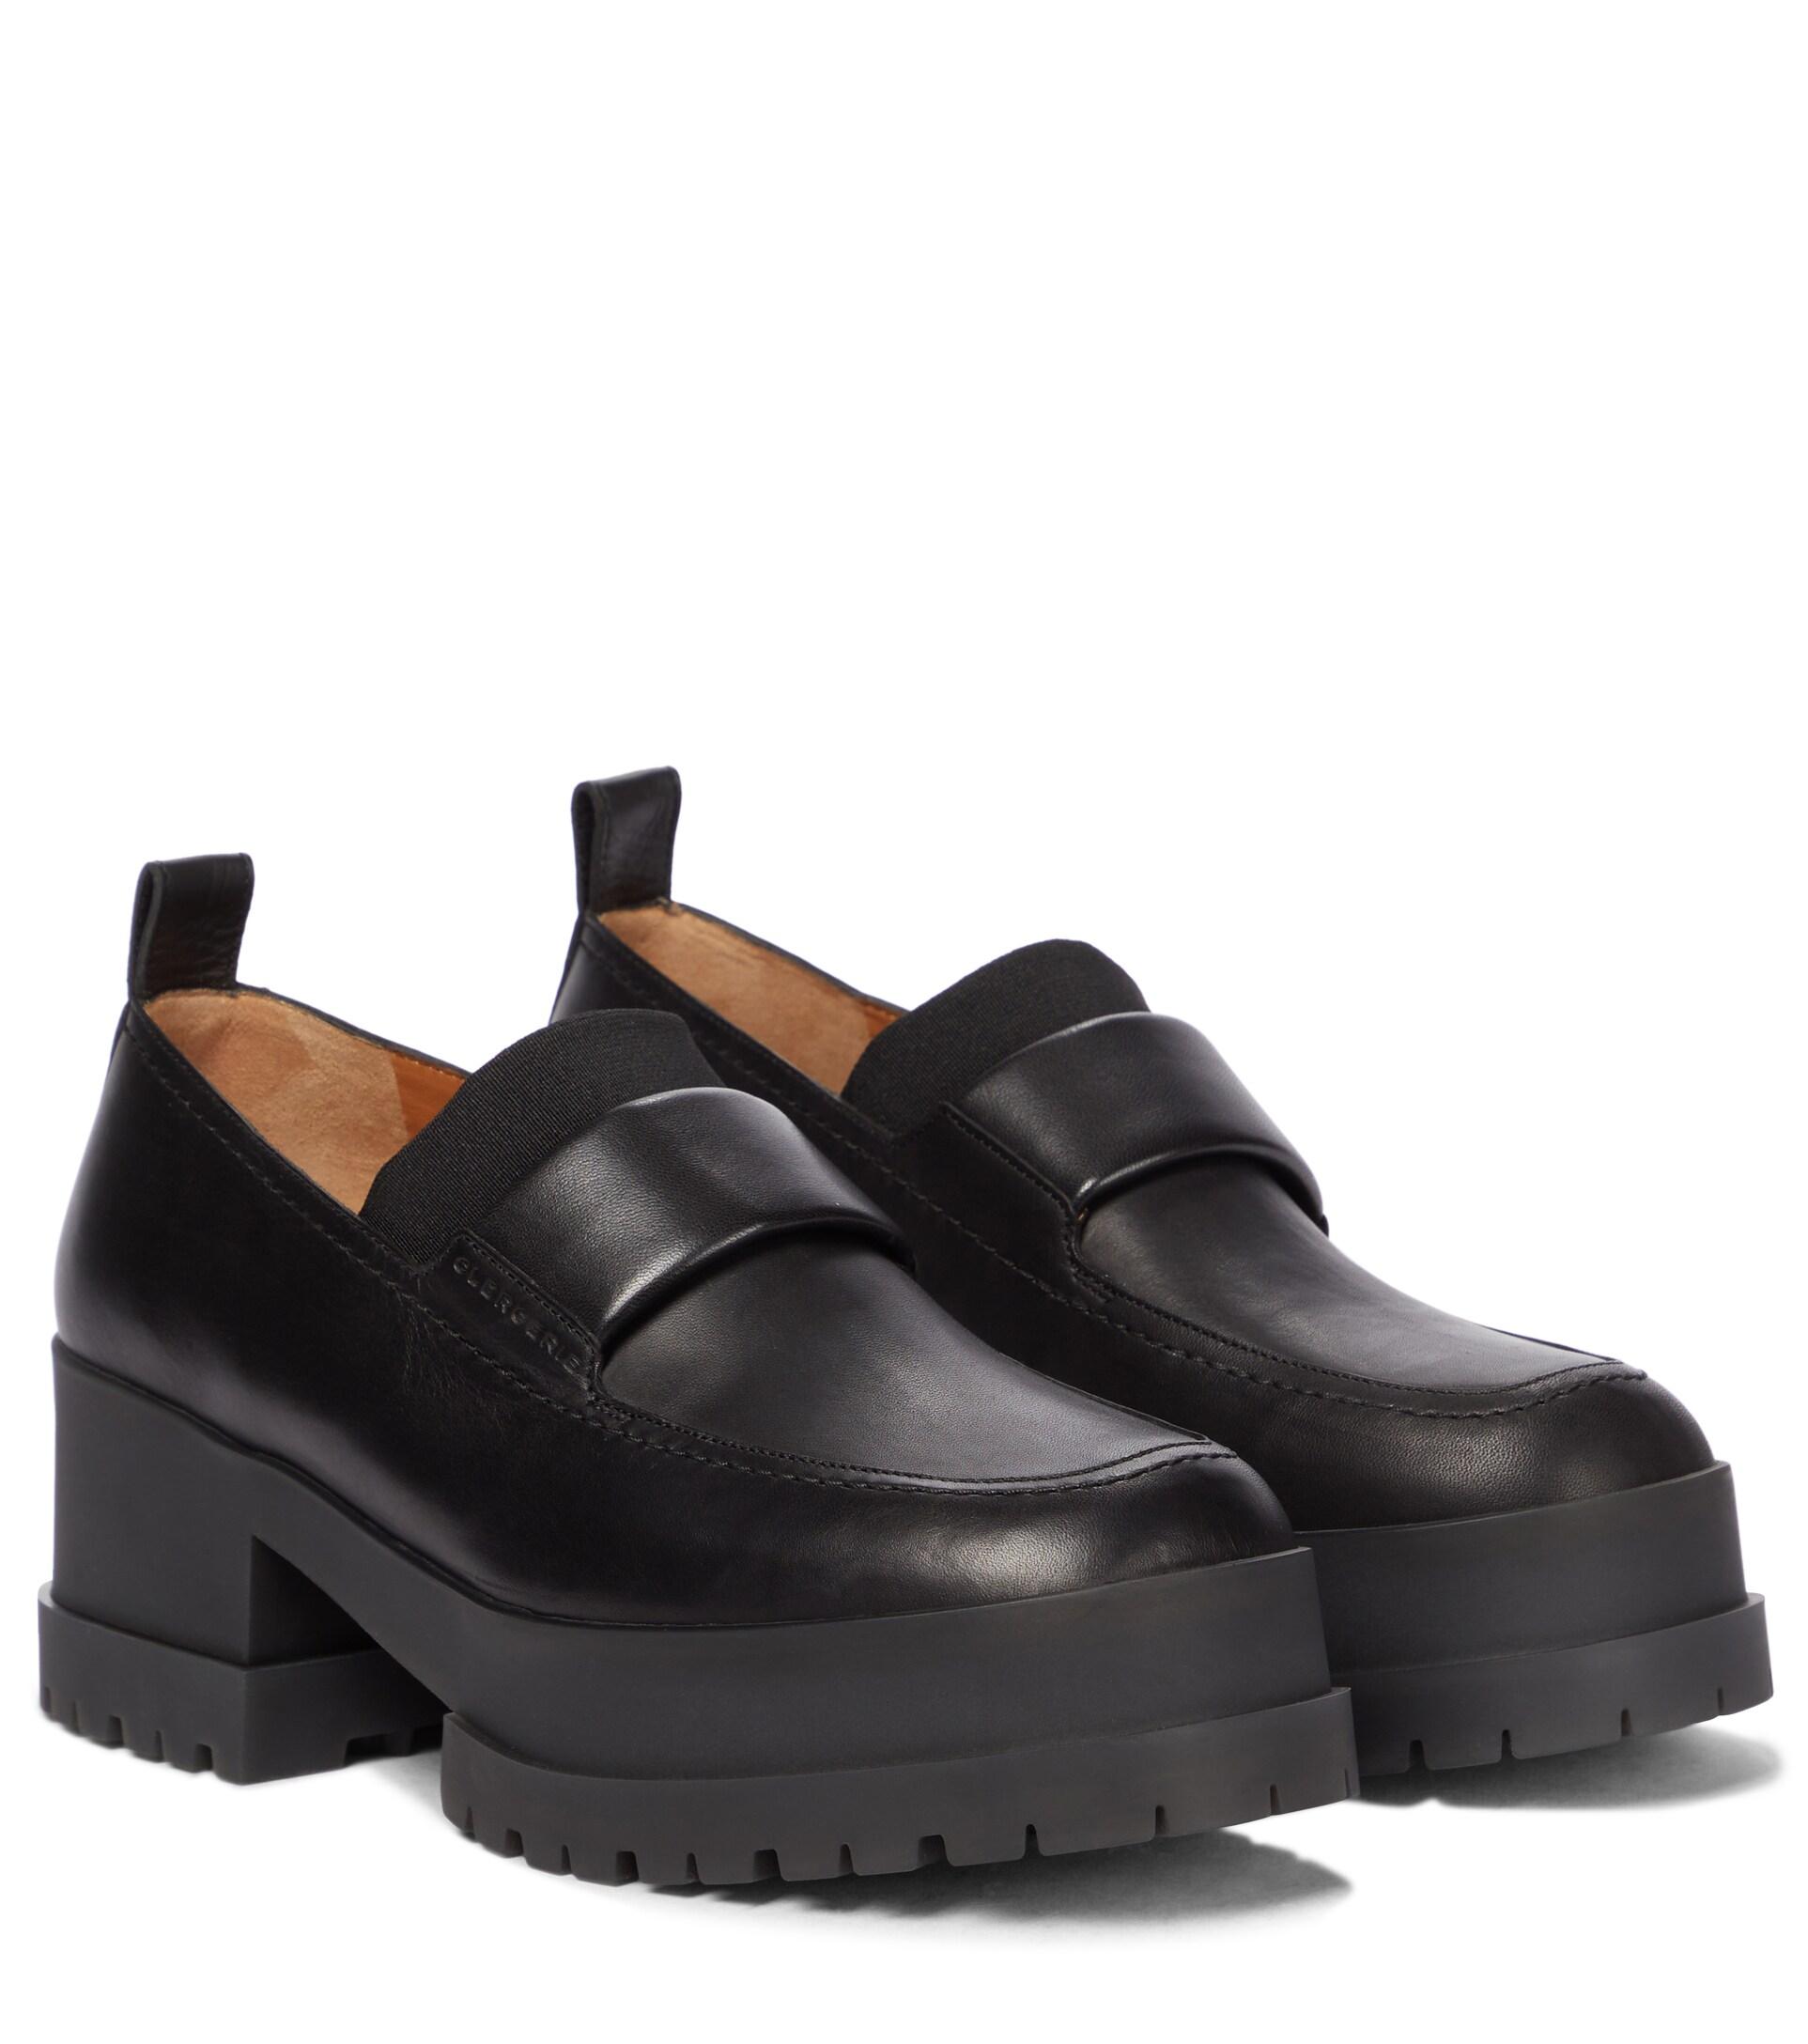 Robert Clergerie Waelly Platform Leather Loafers in Black | Lyst